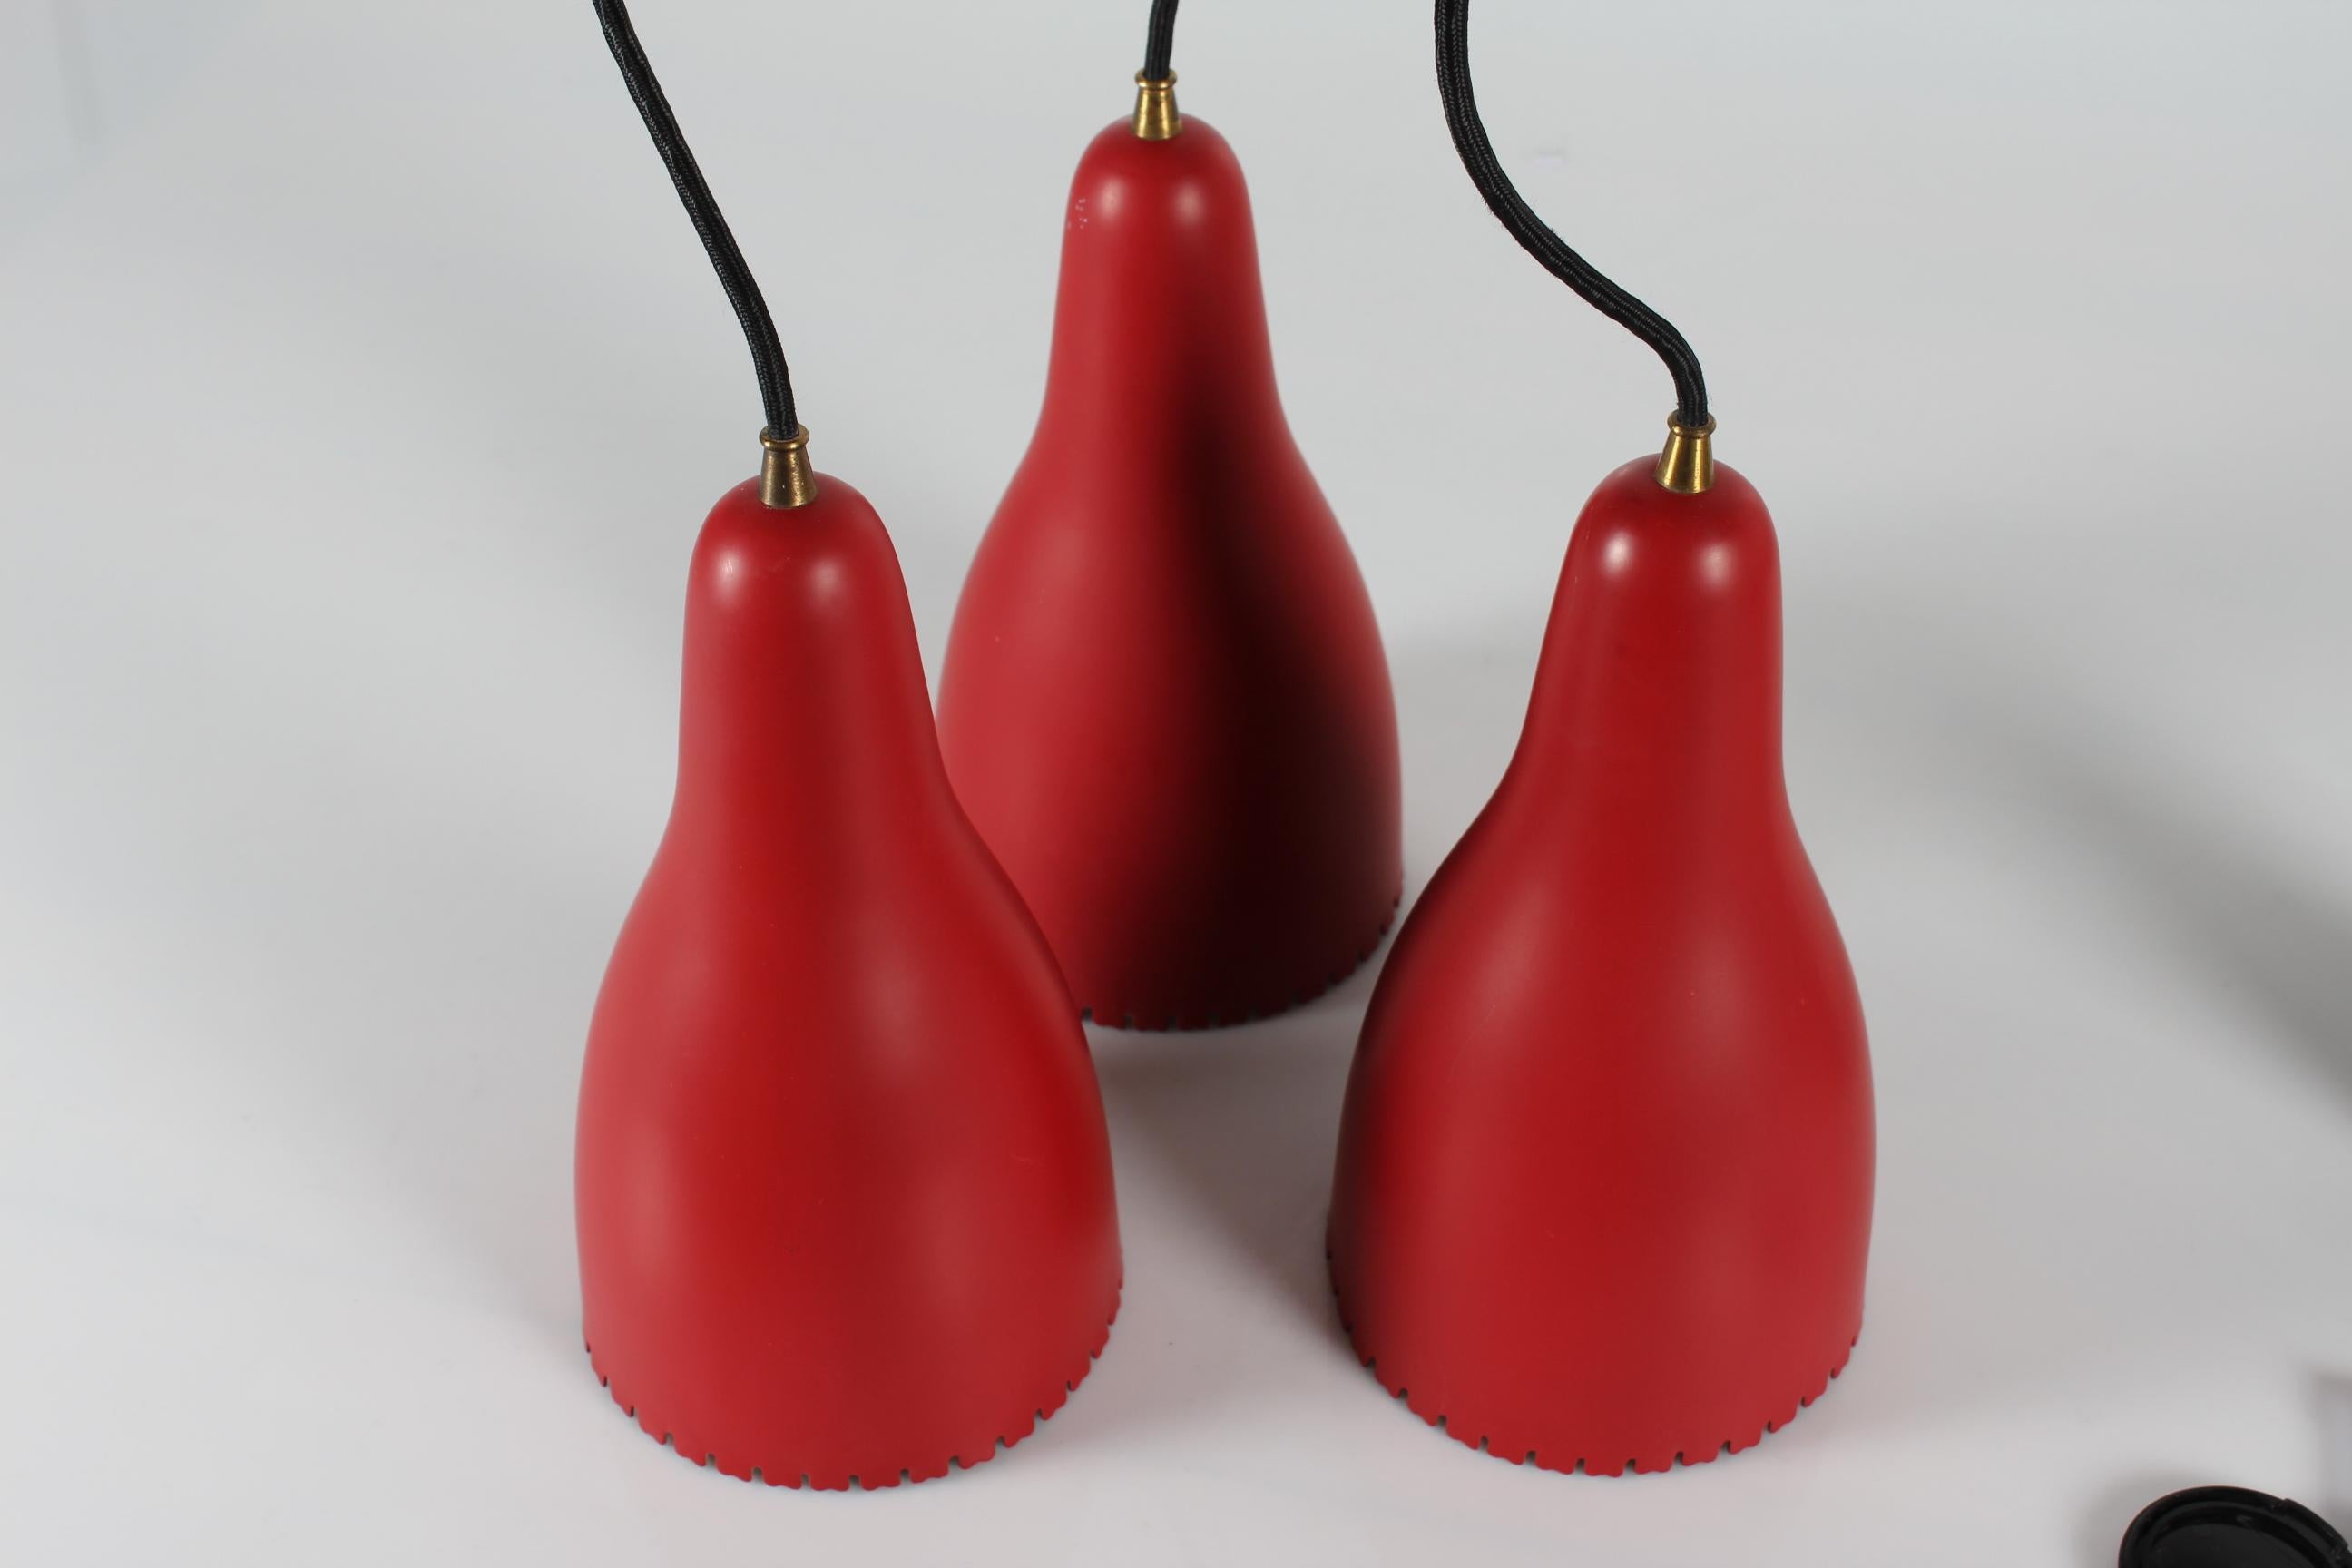 Metal Bent Karlby 3-Cone Chandelier with Red Lacquer Made by Lyfa in Denmarkk, 1950s For Sale